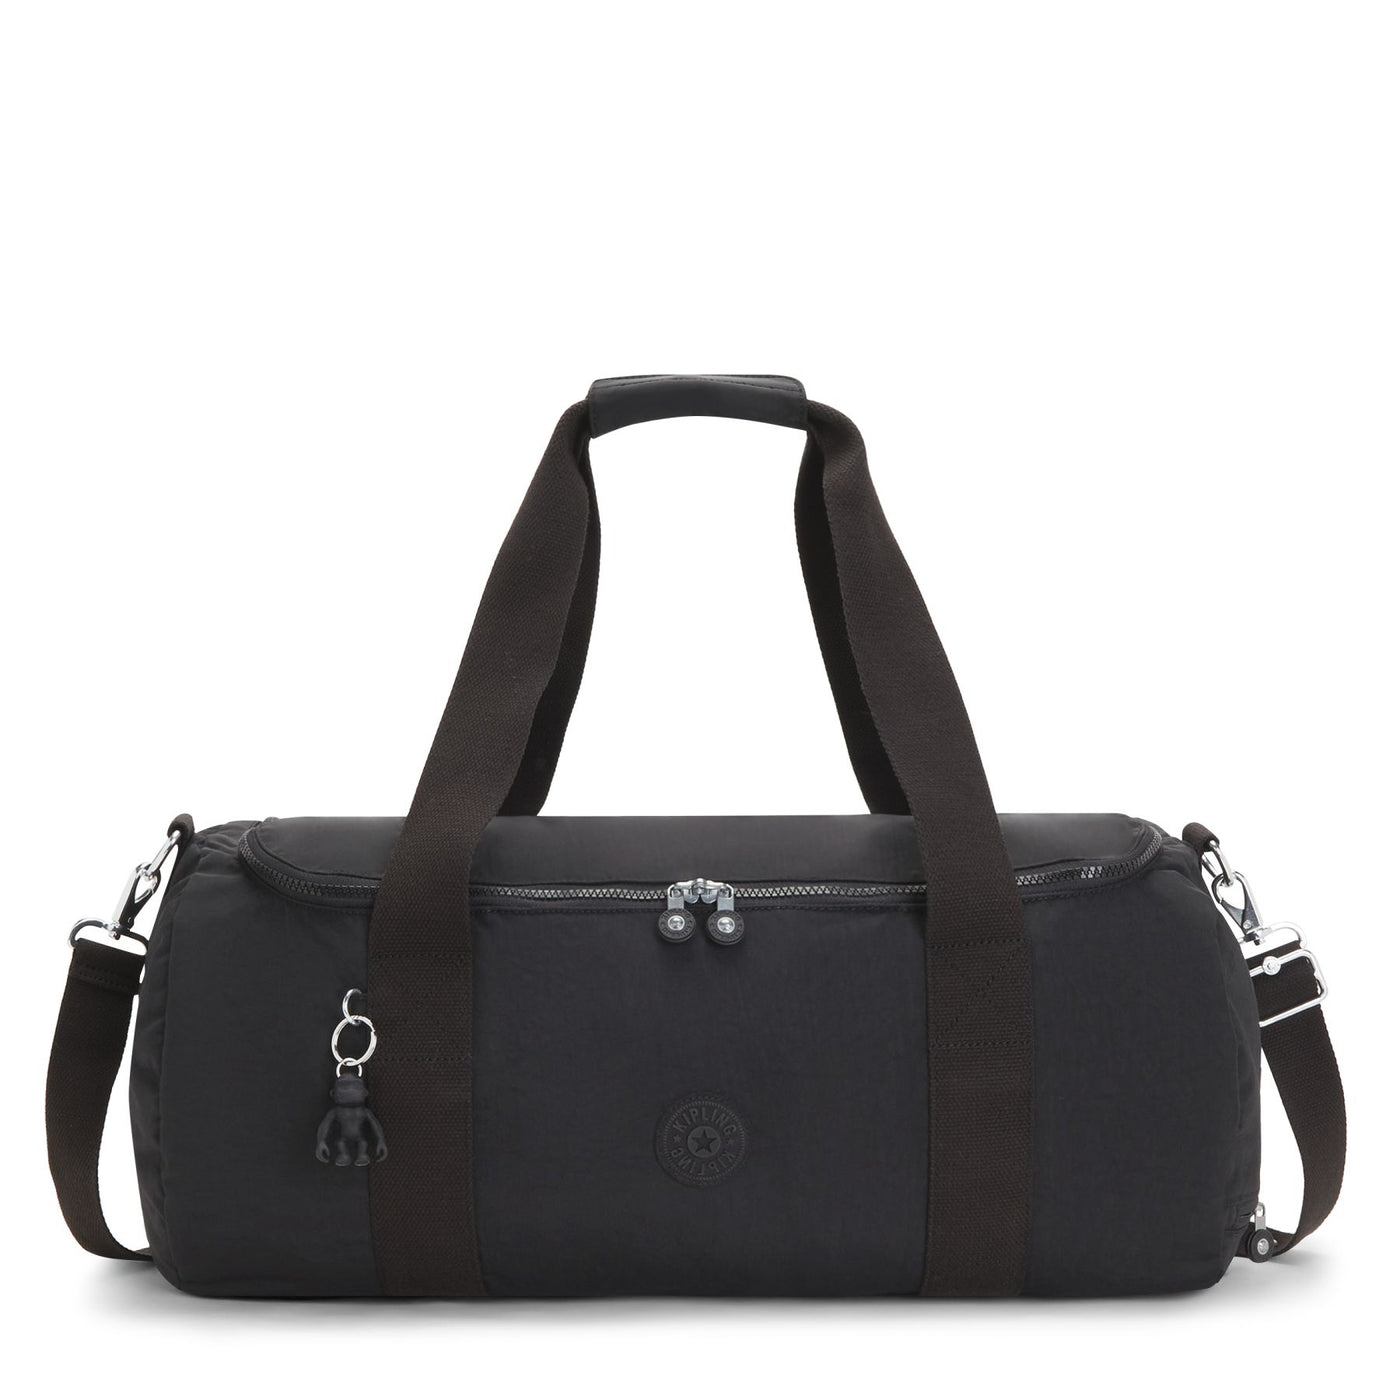 Shop The Latest Collection Of Kipling Argus S-Small Weekender-Ki6810 In Lebanon